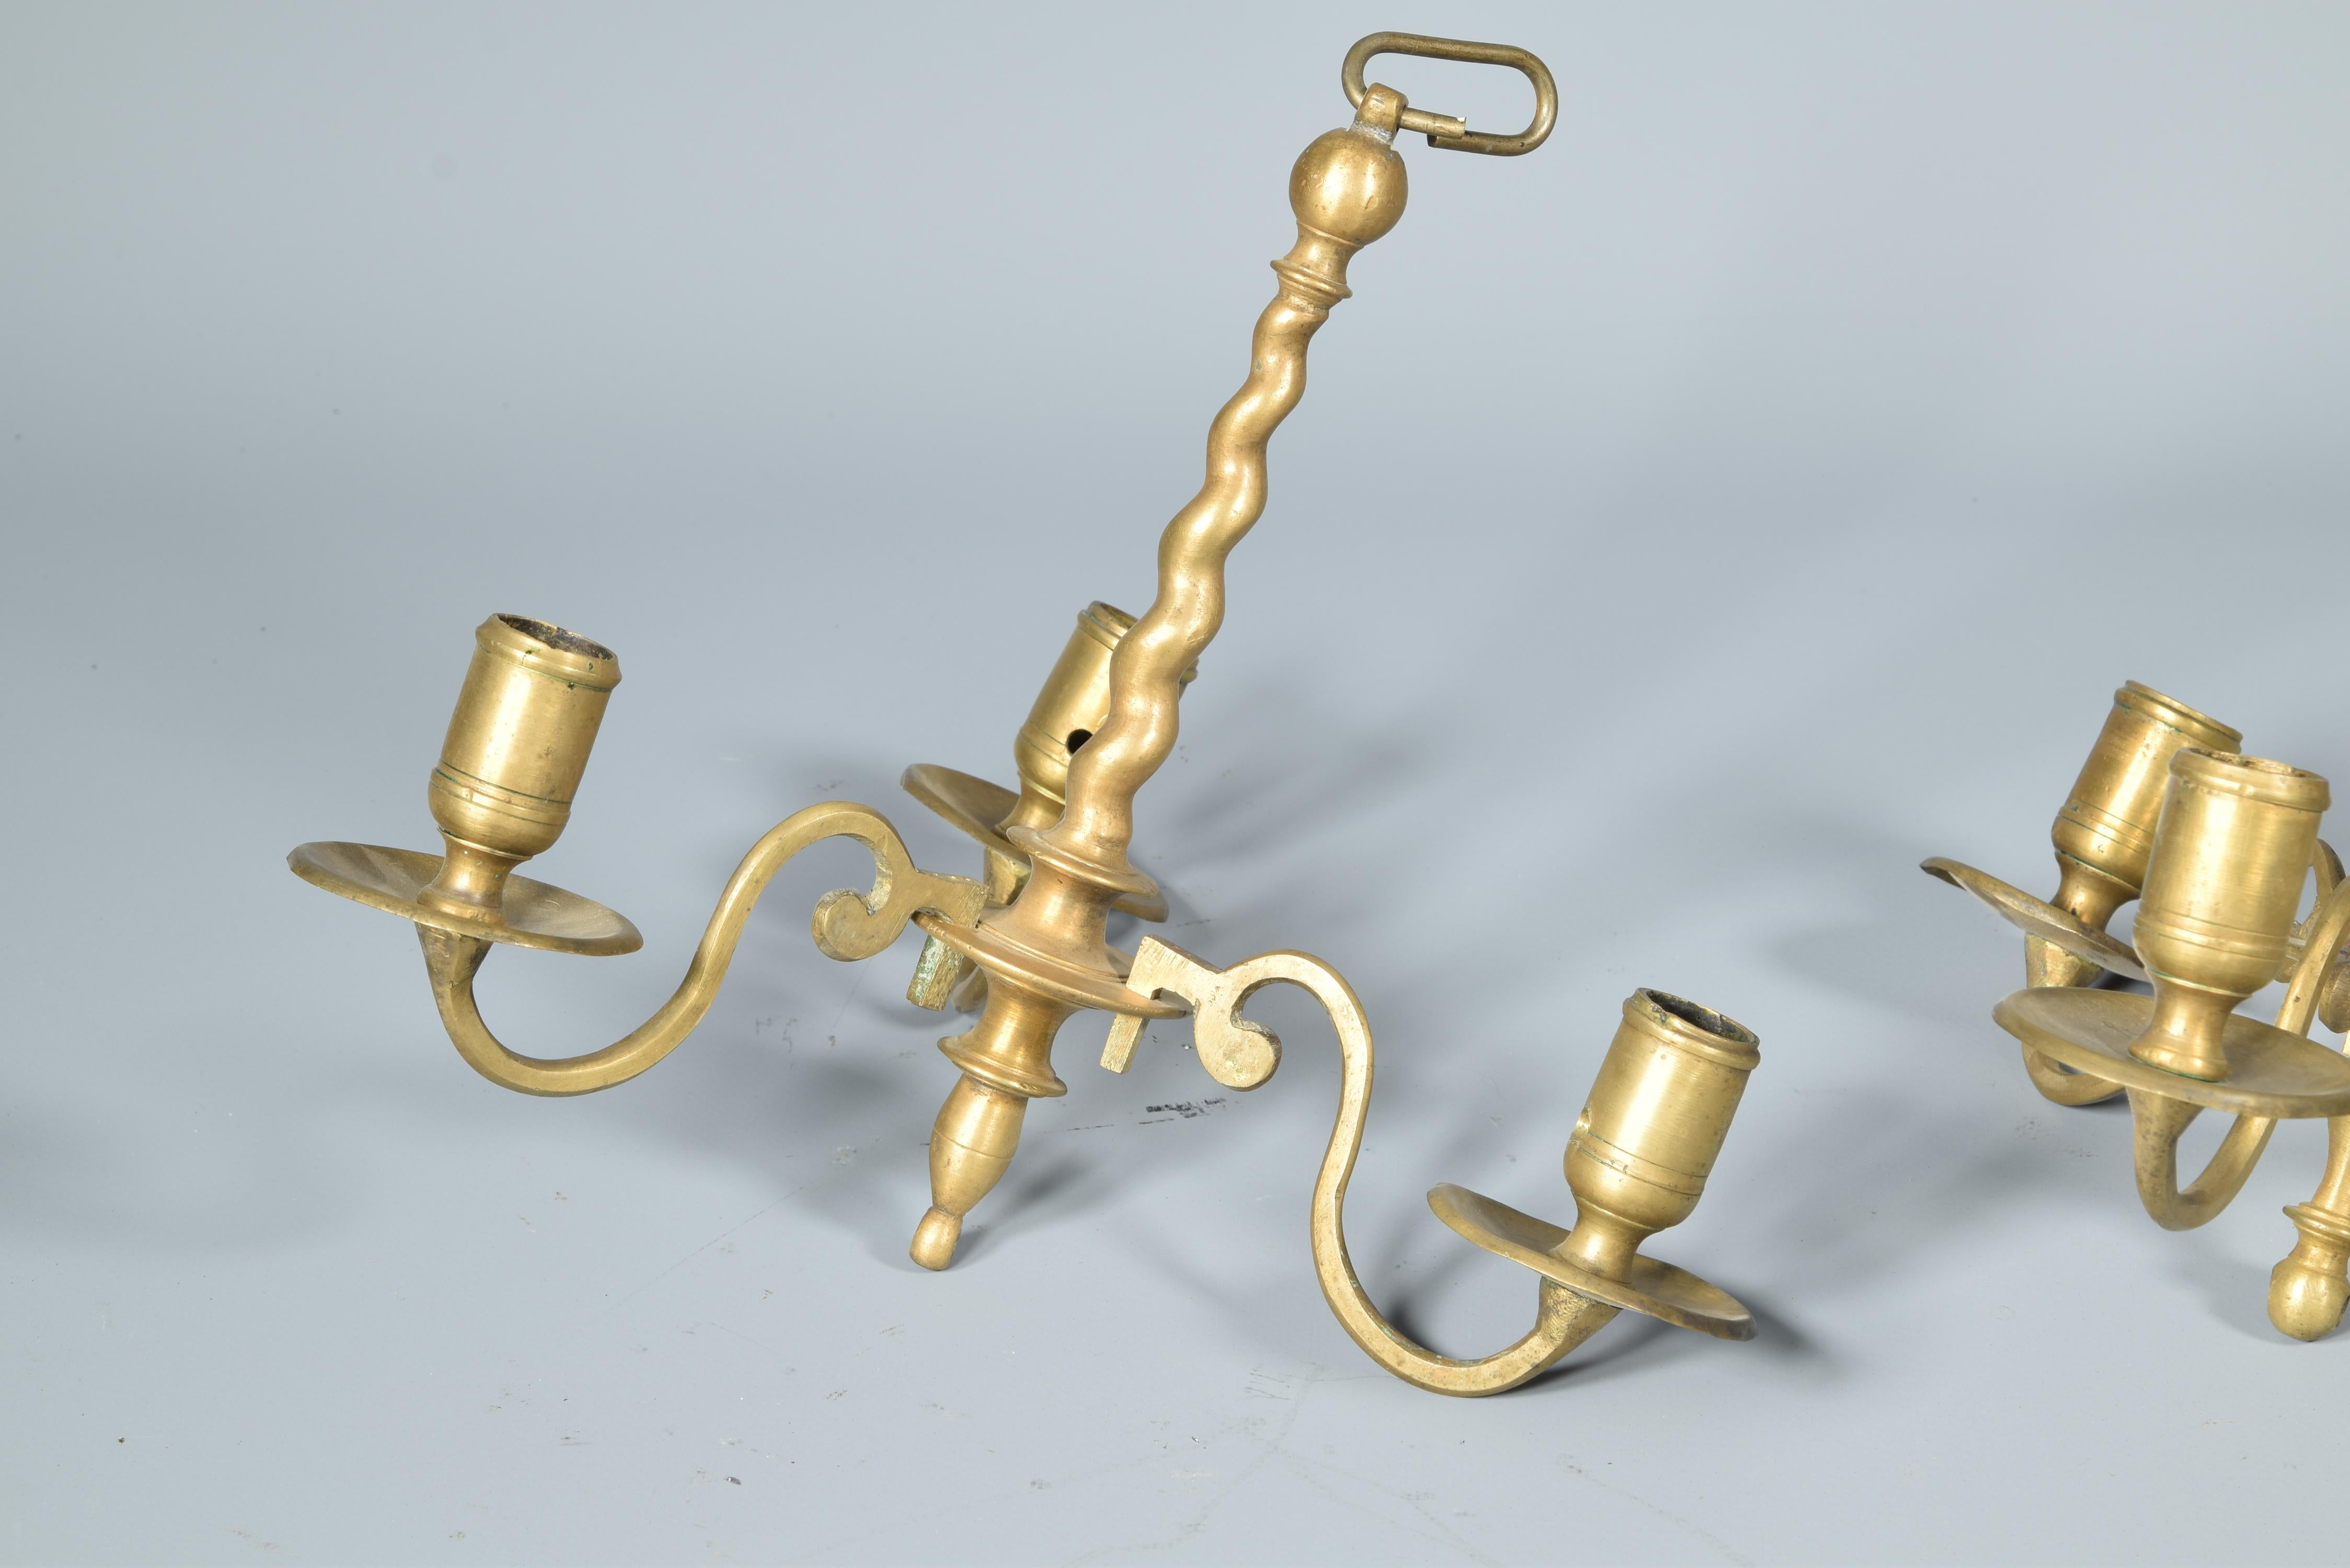 Two votive lamps, bronze, 18th century.
Bronze ceiling lamps with three lights each. One of them has an axis ballasted with discs and spheres from which split the three flat curved arms that end in pieces for the candles. The other has a spiral